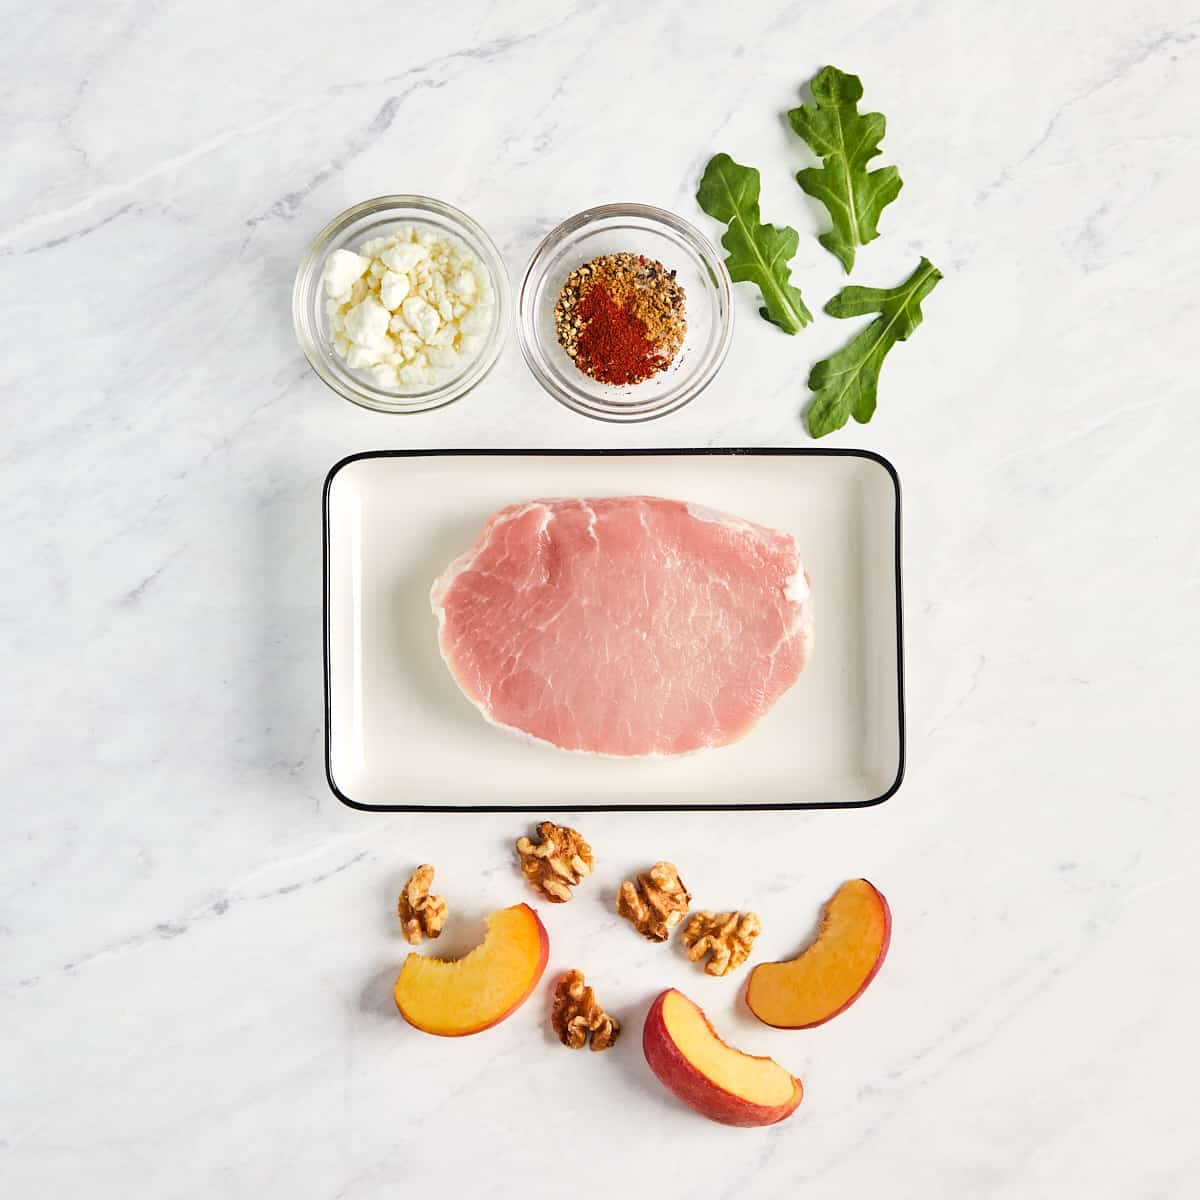 ingredients for grilled pork and peach salad